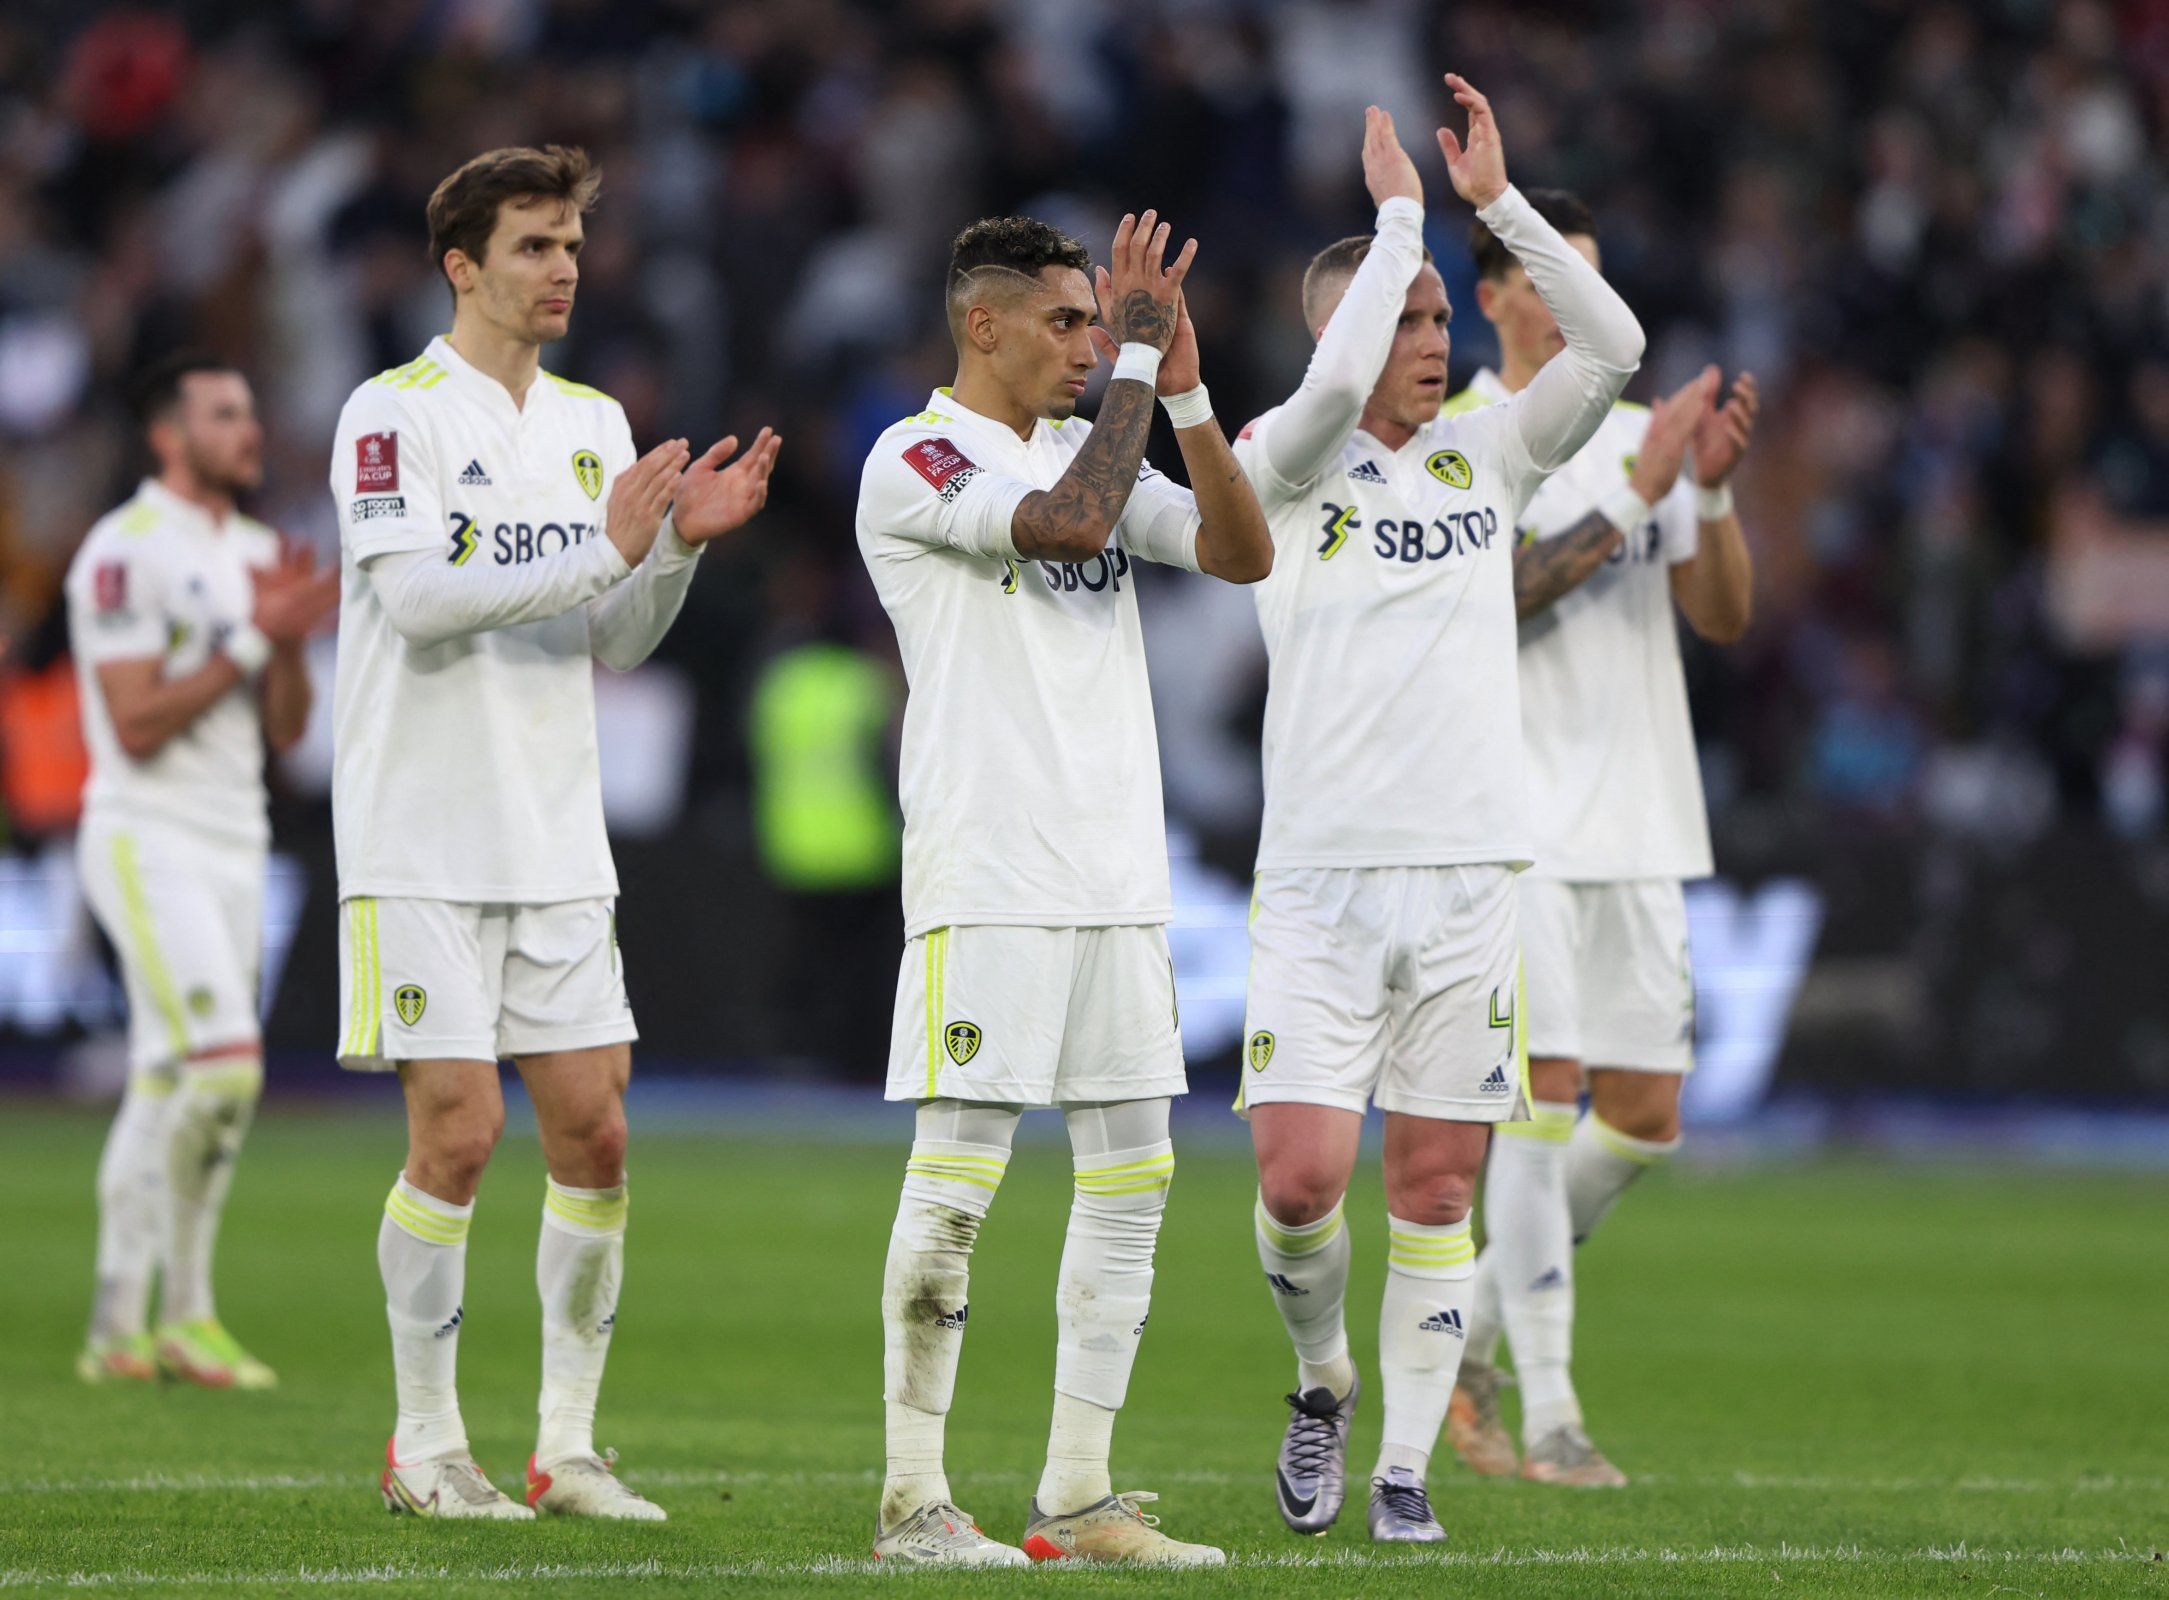 Leeds-United-players-applaud-the-supporters-after-FA-Cup-defeat-to-West-Ham.jpg
